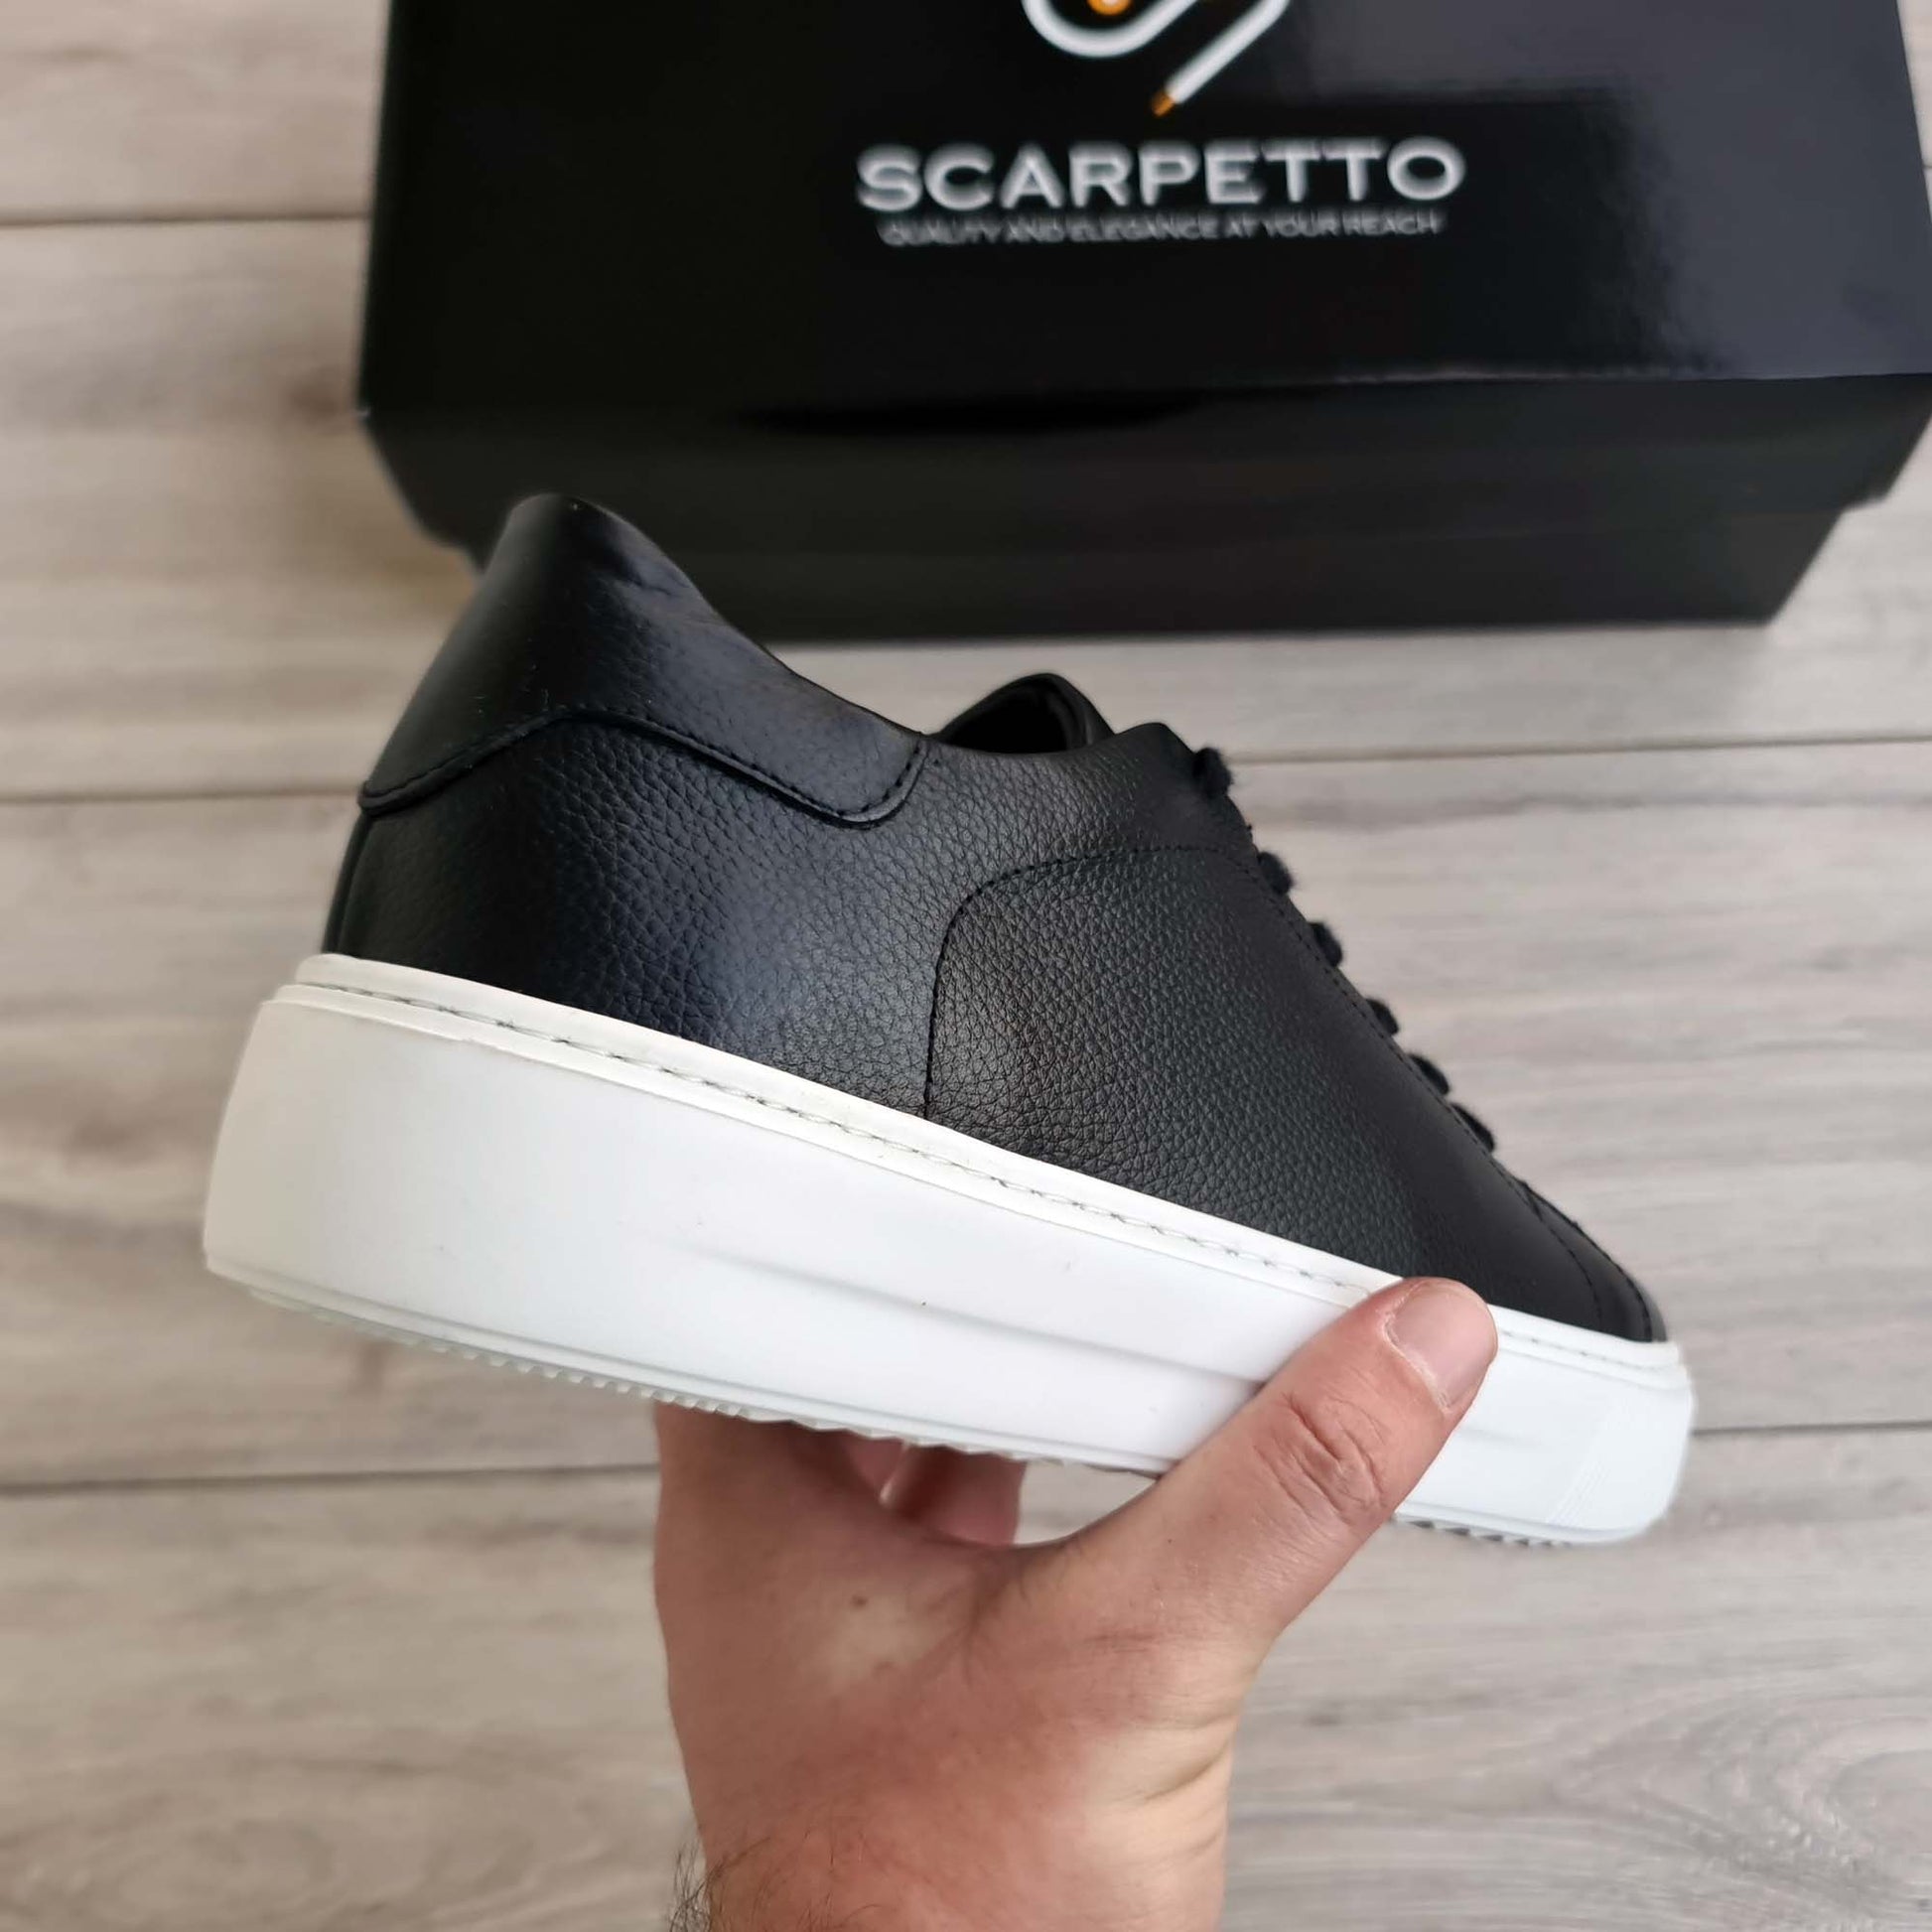 Black Genuine Leather Trainer Sneakers | High Sole